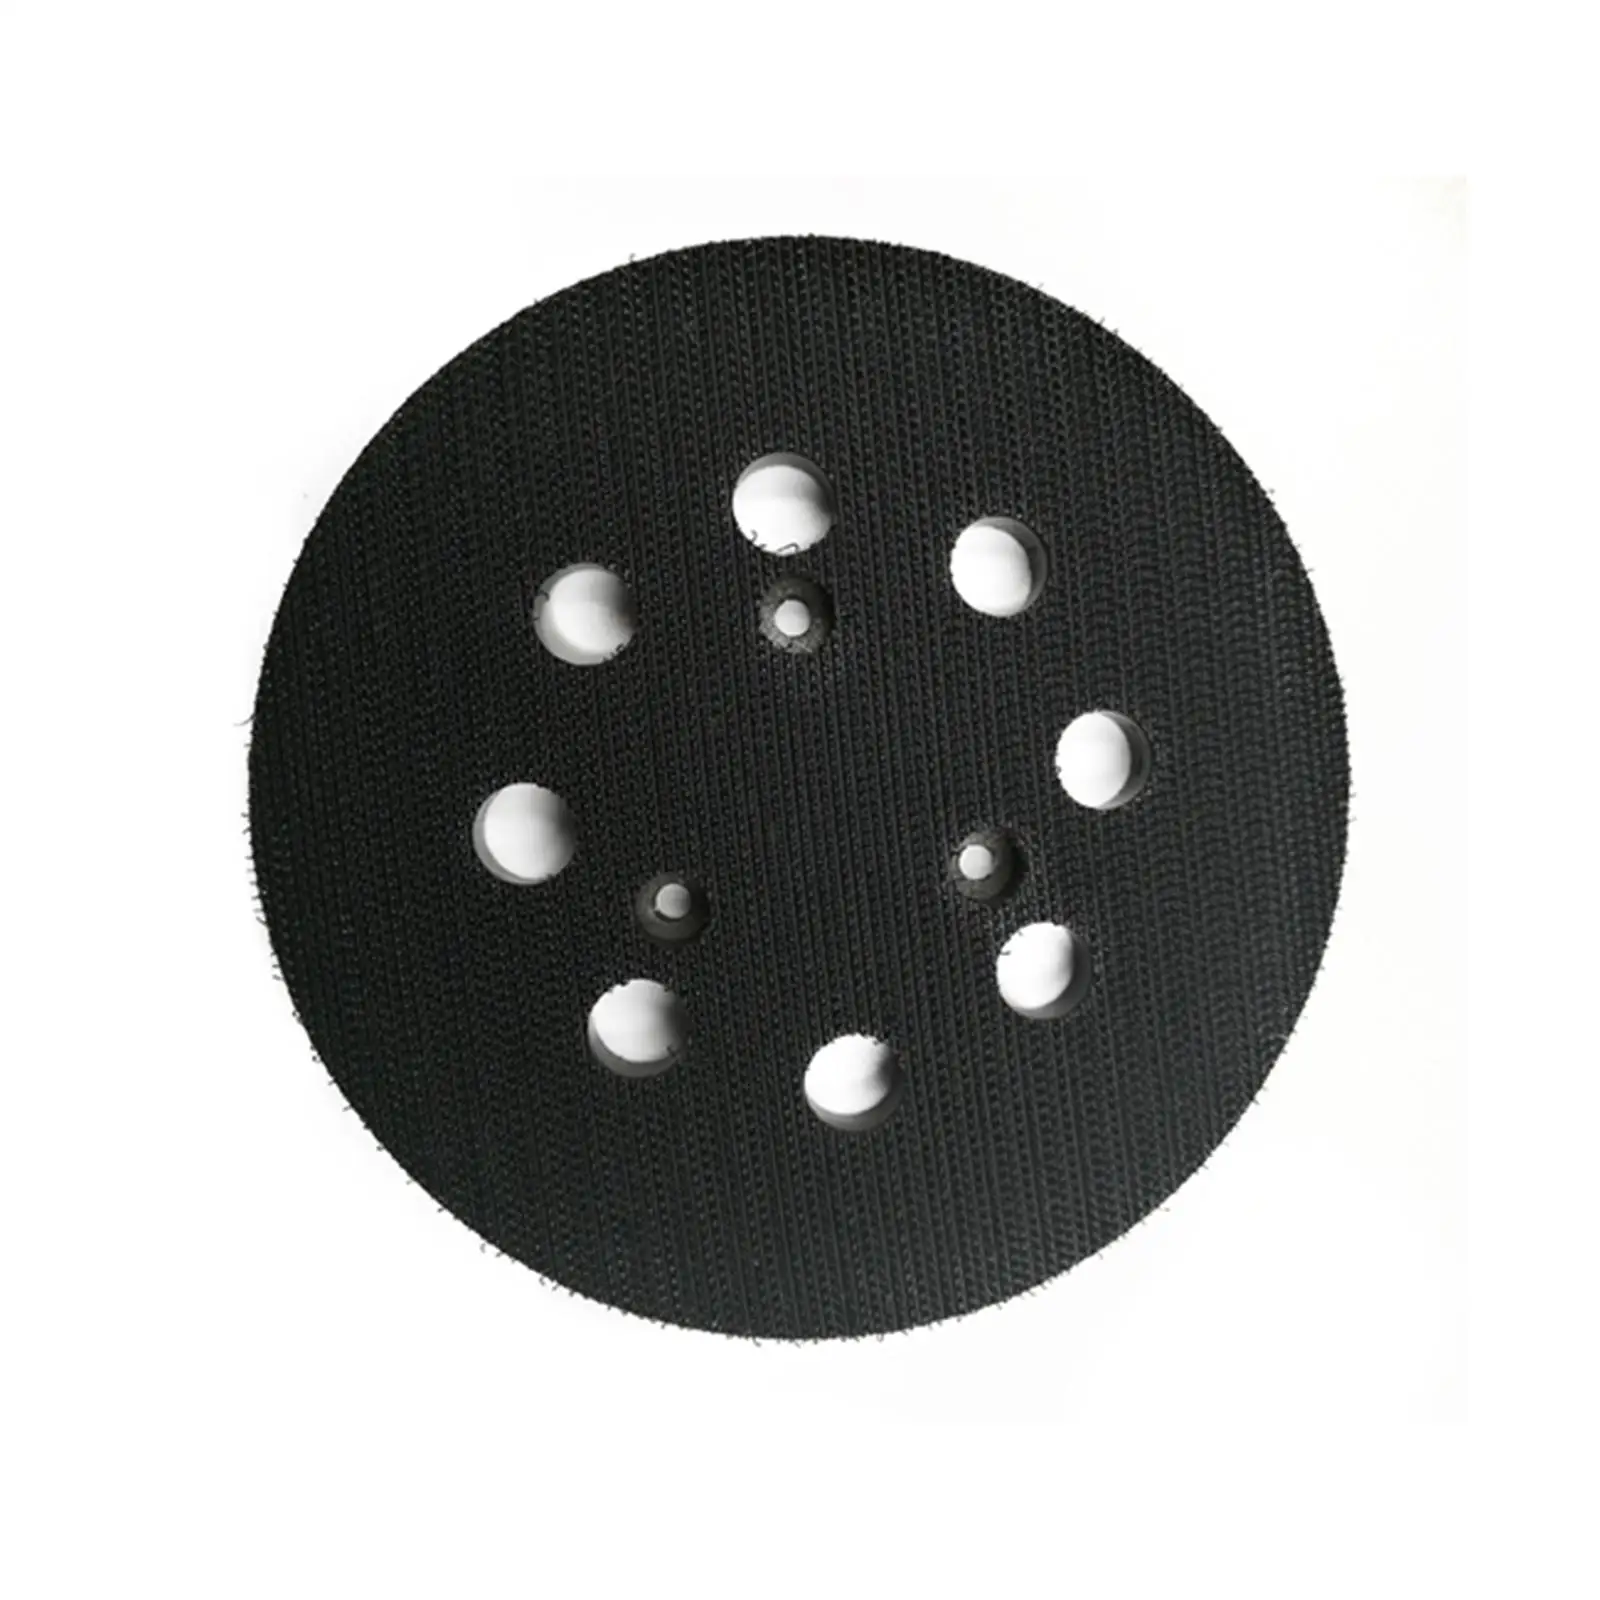 5 & Loop Backer Pad 8 Vacuum Holes for Auto Woodworking